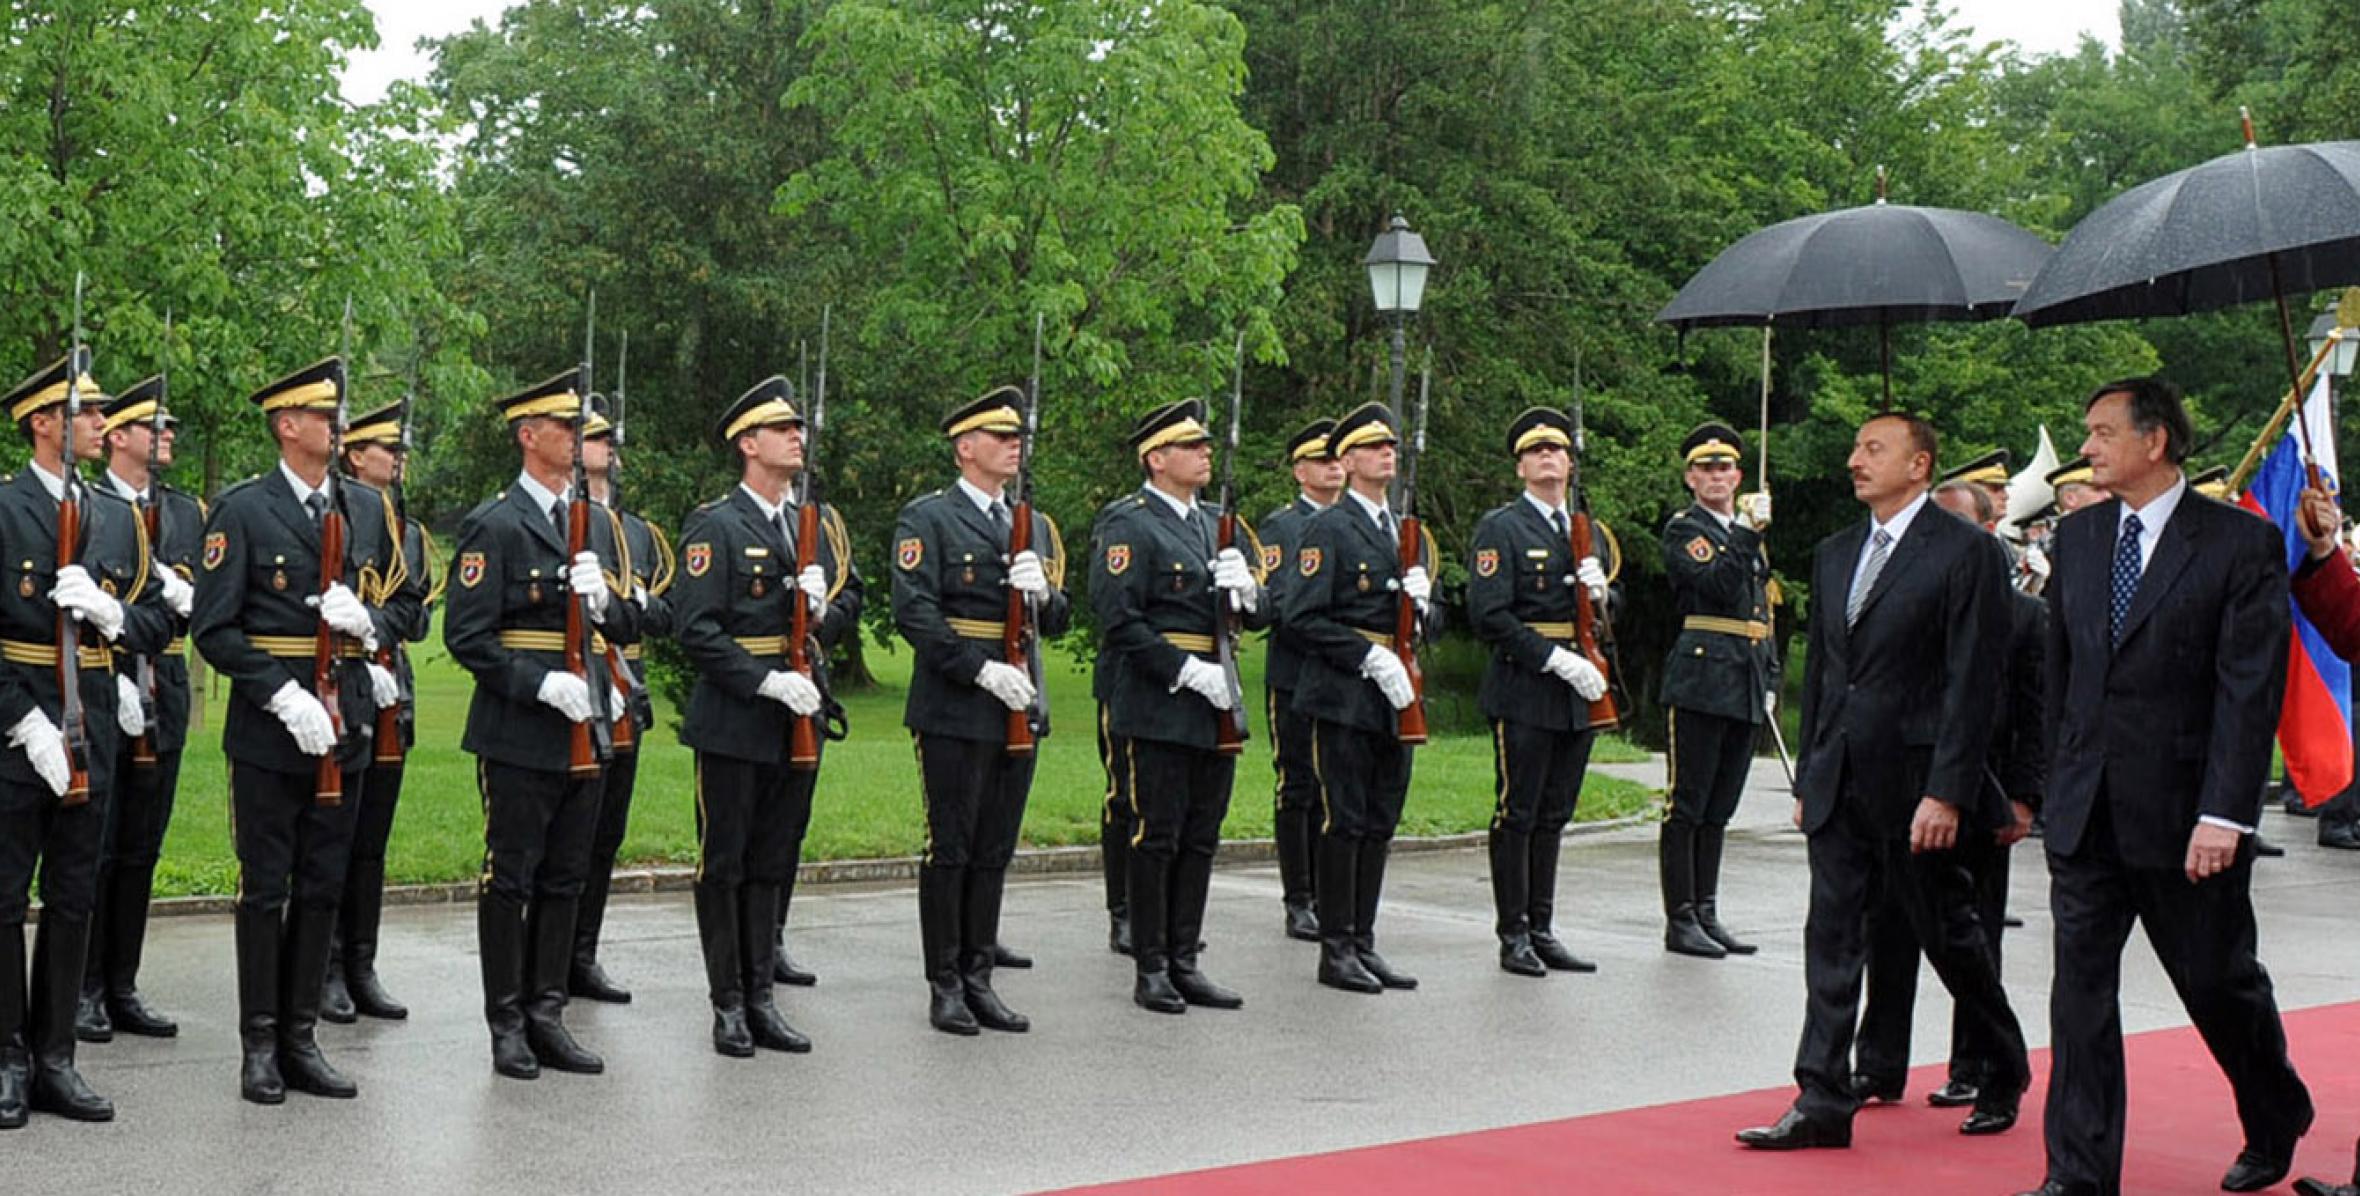 Official welcoming ceremony of Ilham Aliyev in Slovenia was held